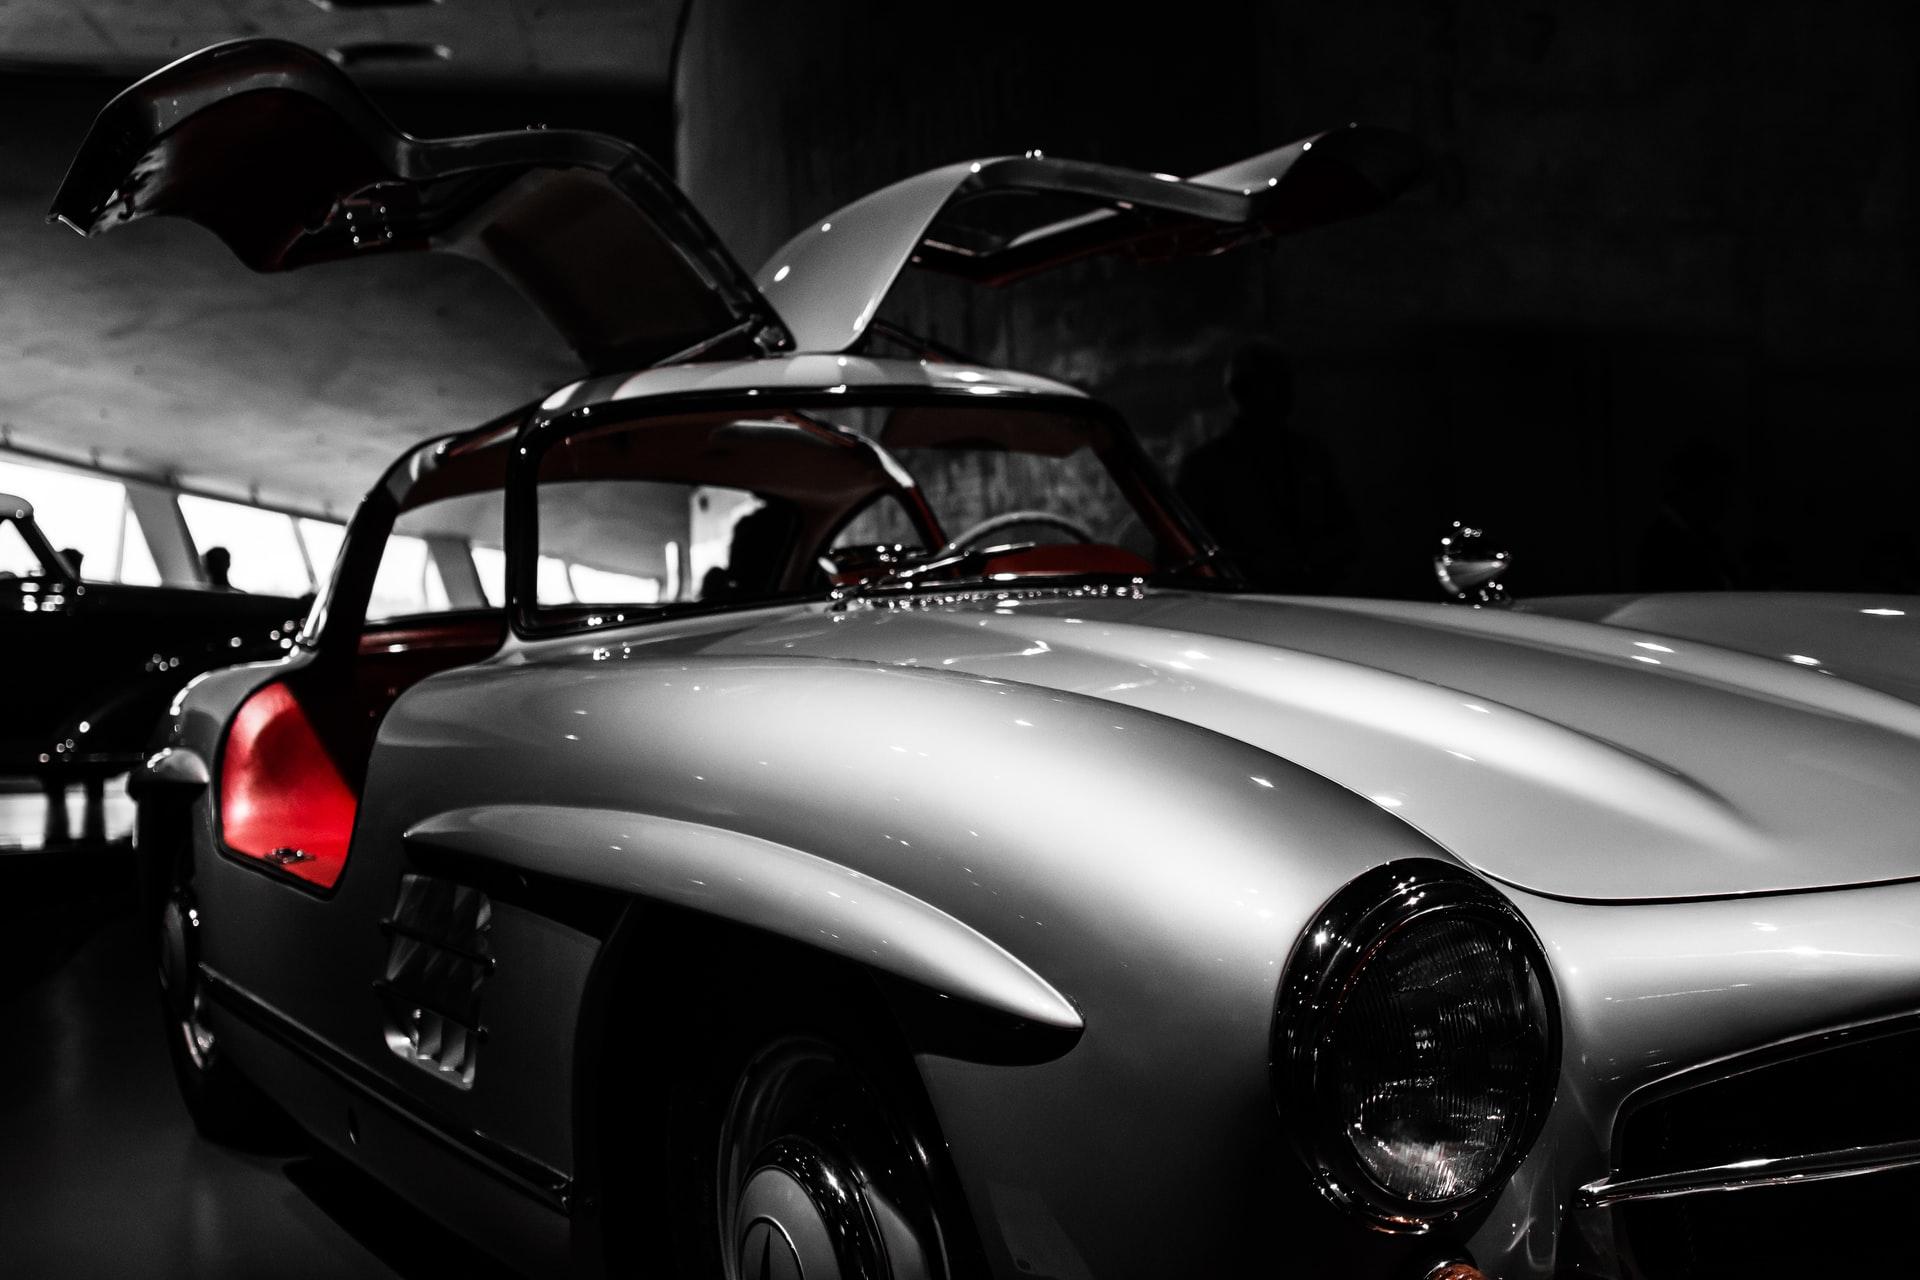 If you thought Mercedes made expensive cars, wait until you see the 300 SLR.